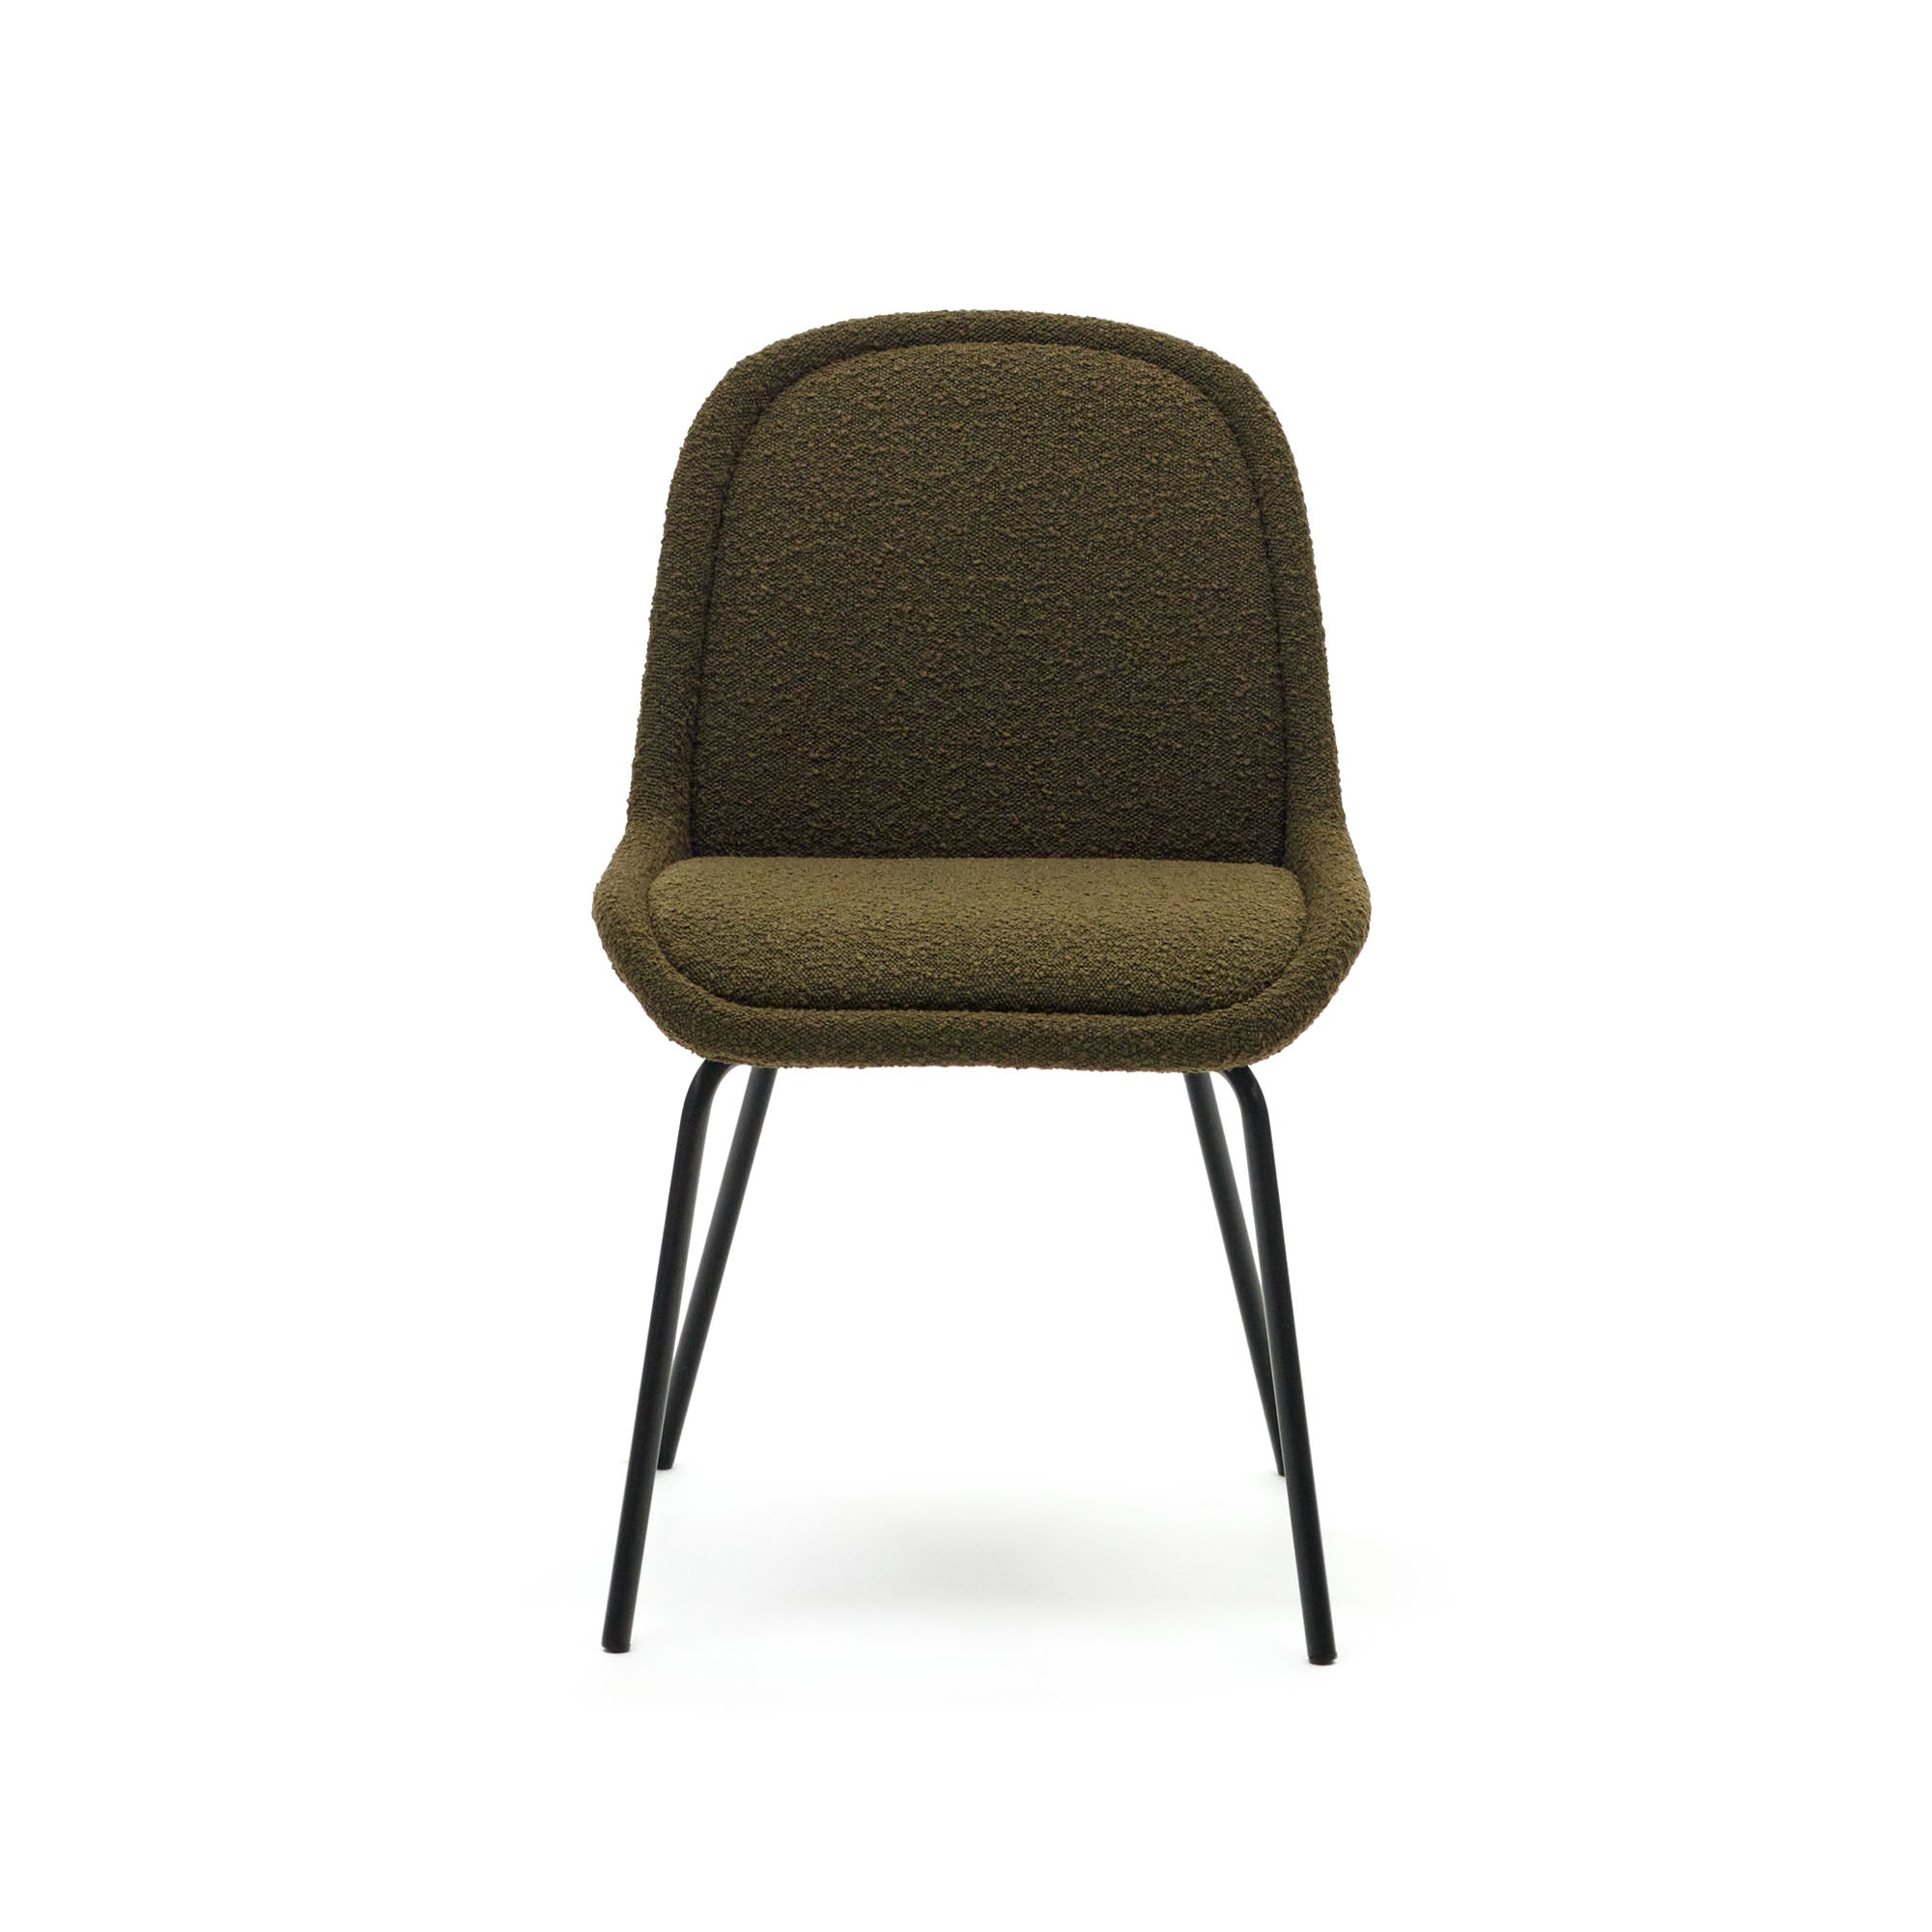 Aimin chair in green fleece and steel legs with a matte black painted finish